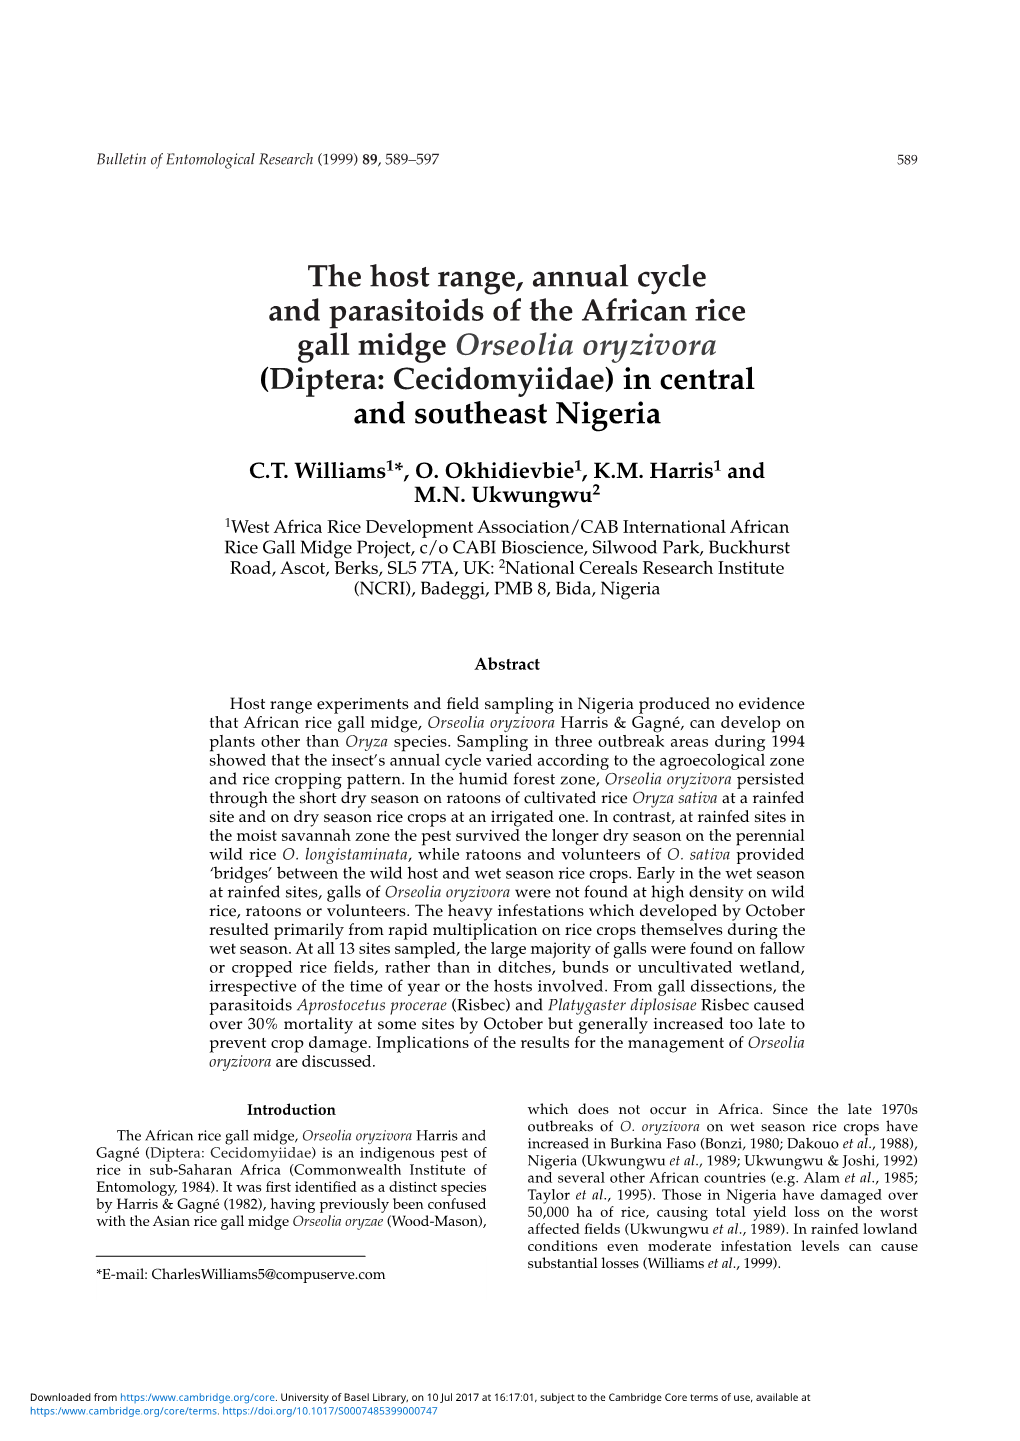 The Host Range, Annual Cycle and Parasitoids of the African Rice Gall Midge Orseolia Oryzivora (Diptera: Cecidomyiidae) in Central and Southeast Nigeria